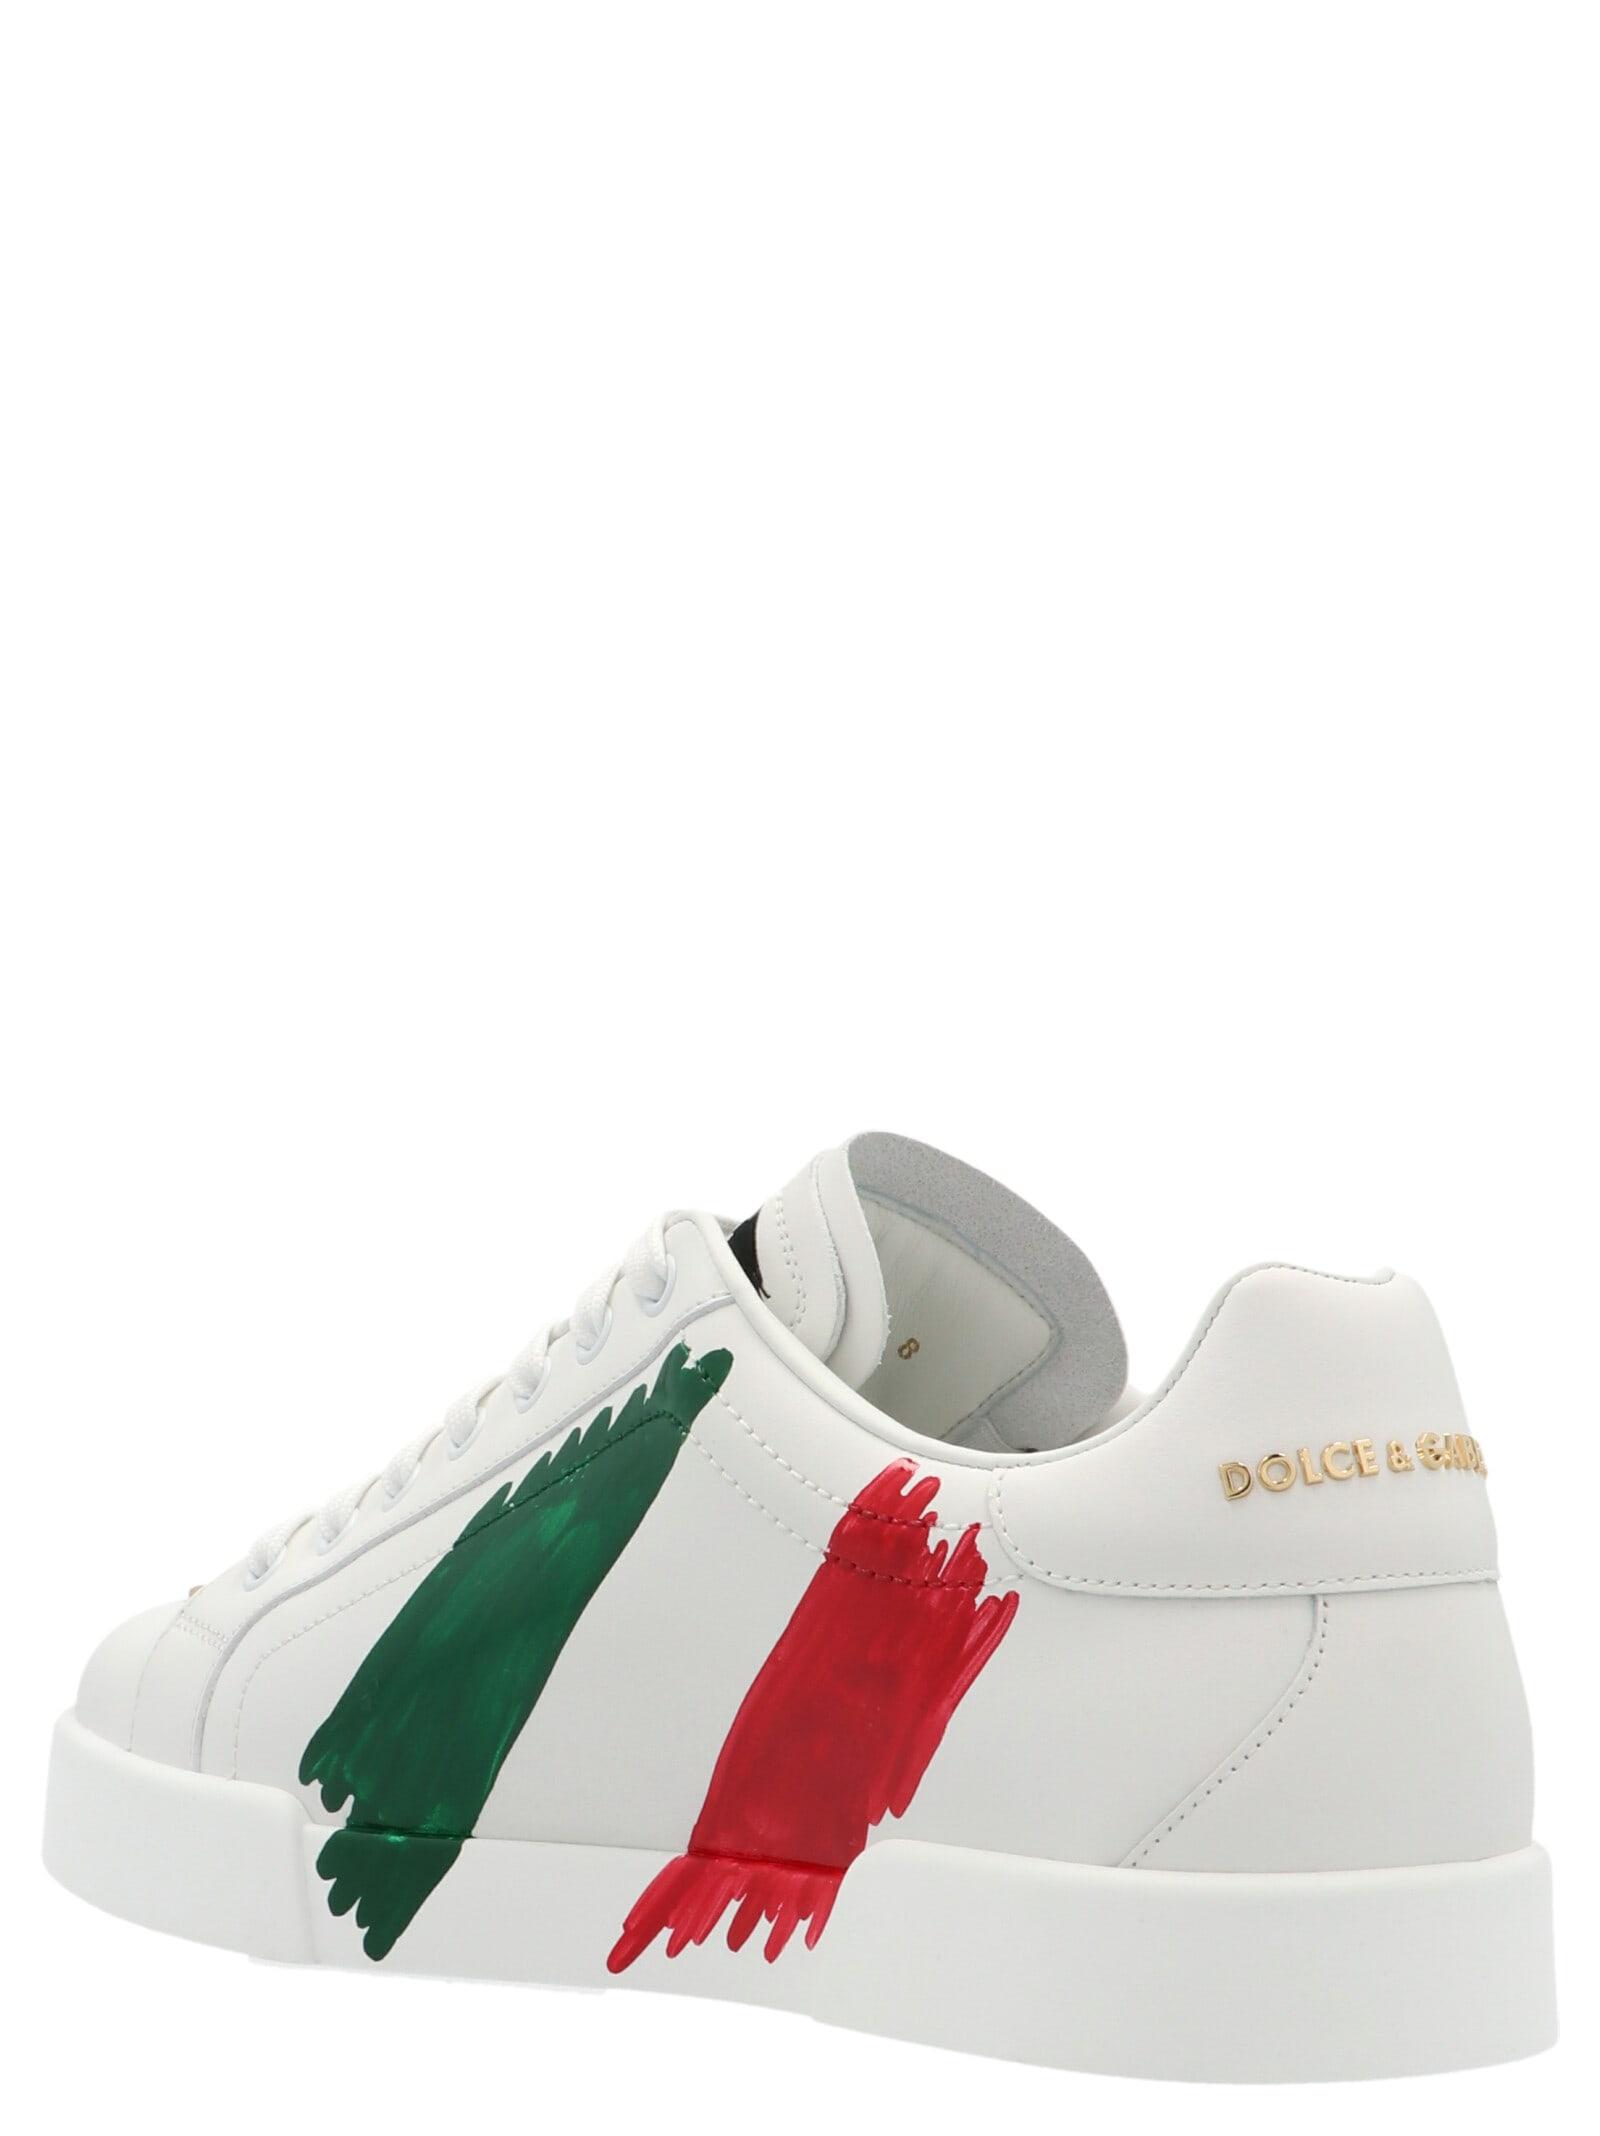 Dolce & Gabbana Made In Italy Sneakers in White for Men | Lyst